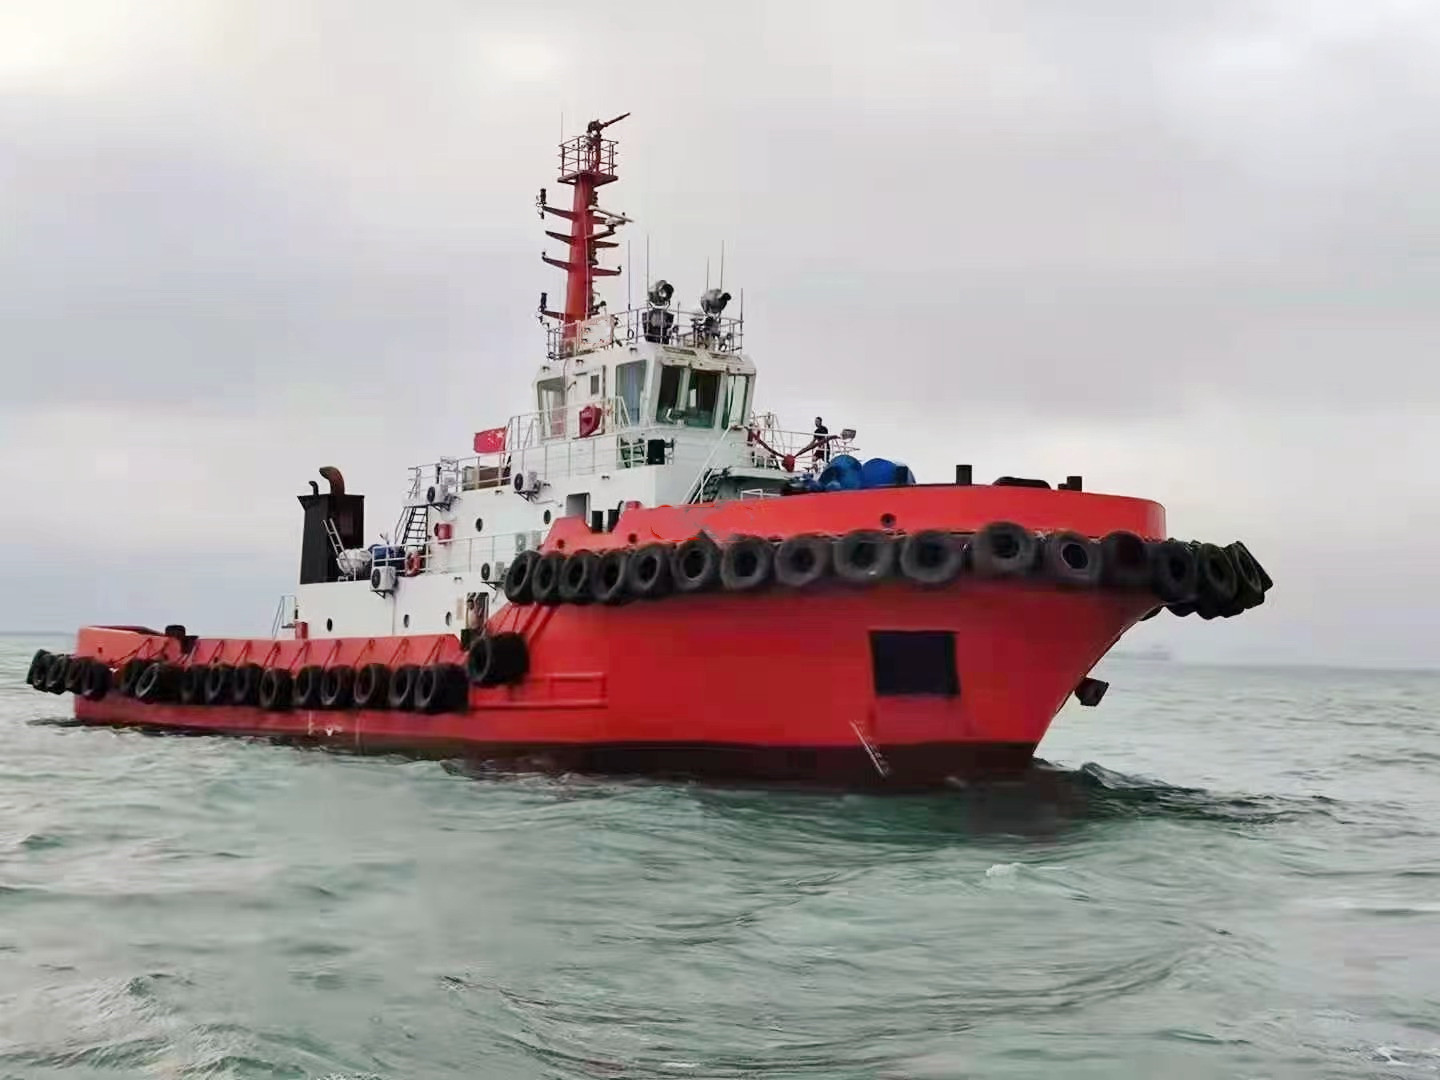 5440 PS Ocean-going Tug For Sale